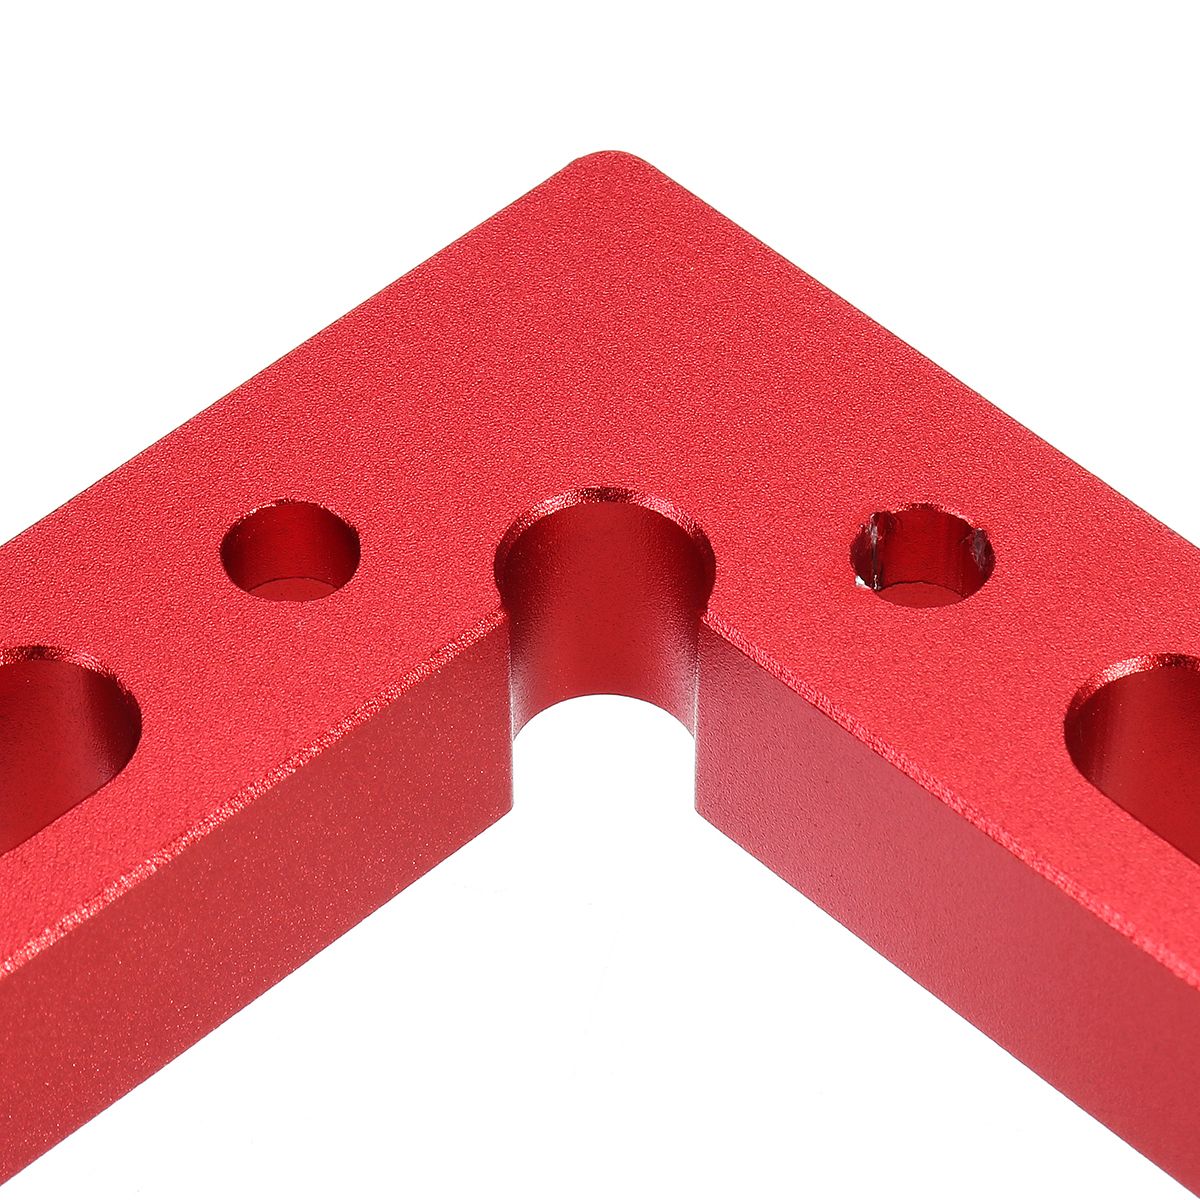 L-Shape-Clamp-90-Degree-Square-Right-Angle-Corner-Wood-Metal-Welding-Multifunctional-Tools-1543730